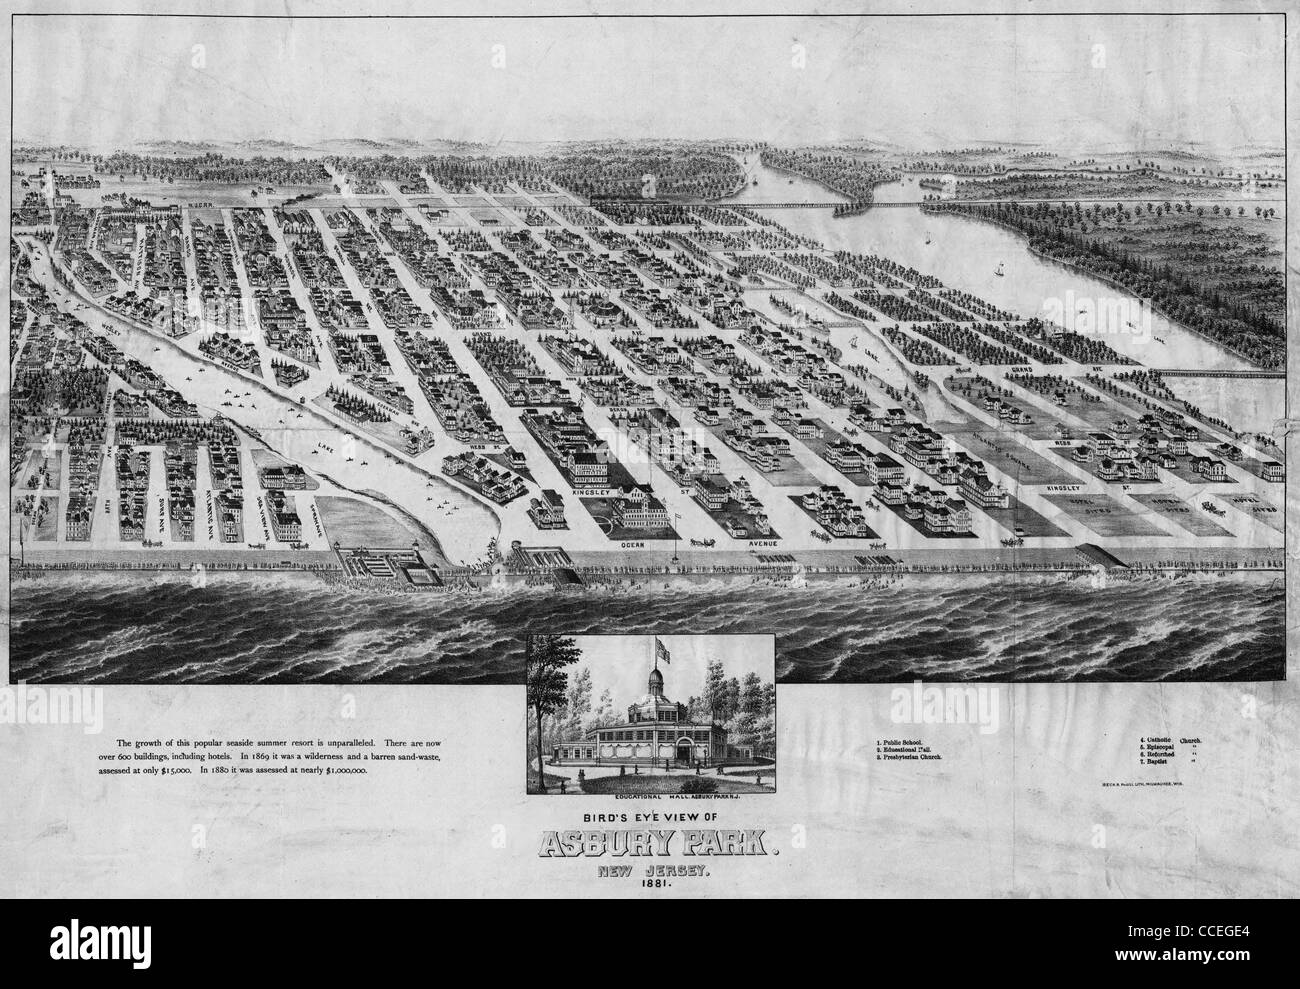 Map of asbury park 1881 Black and White Stock Photos & Images - Alamy